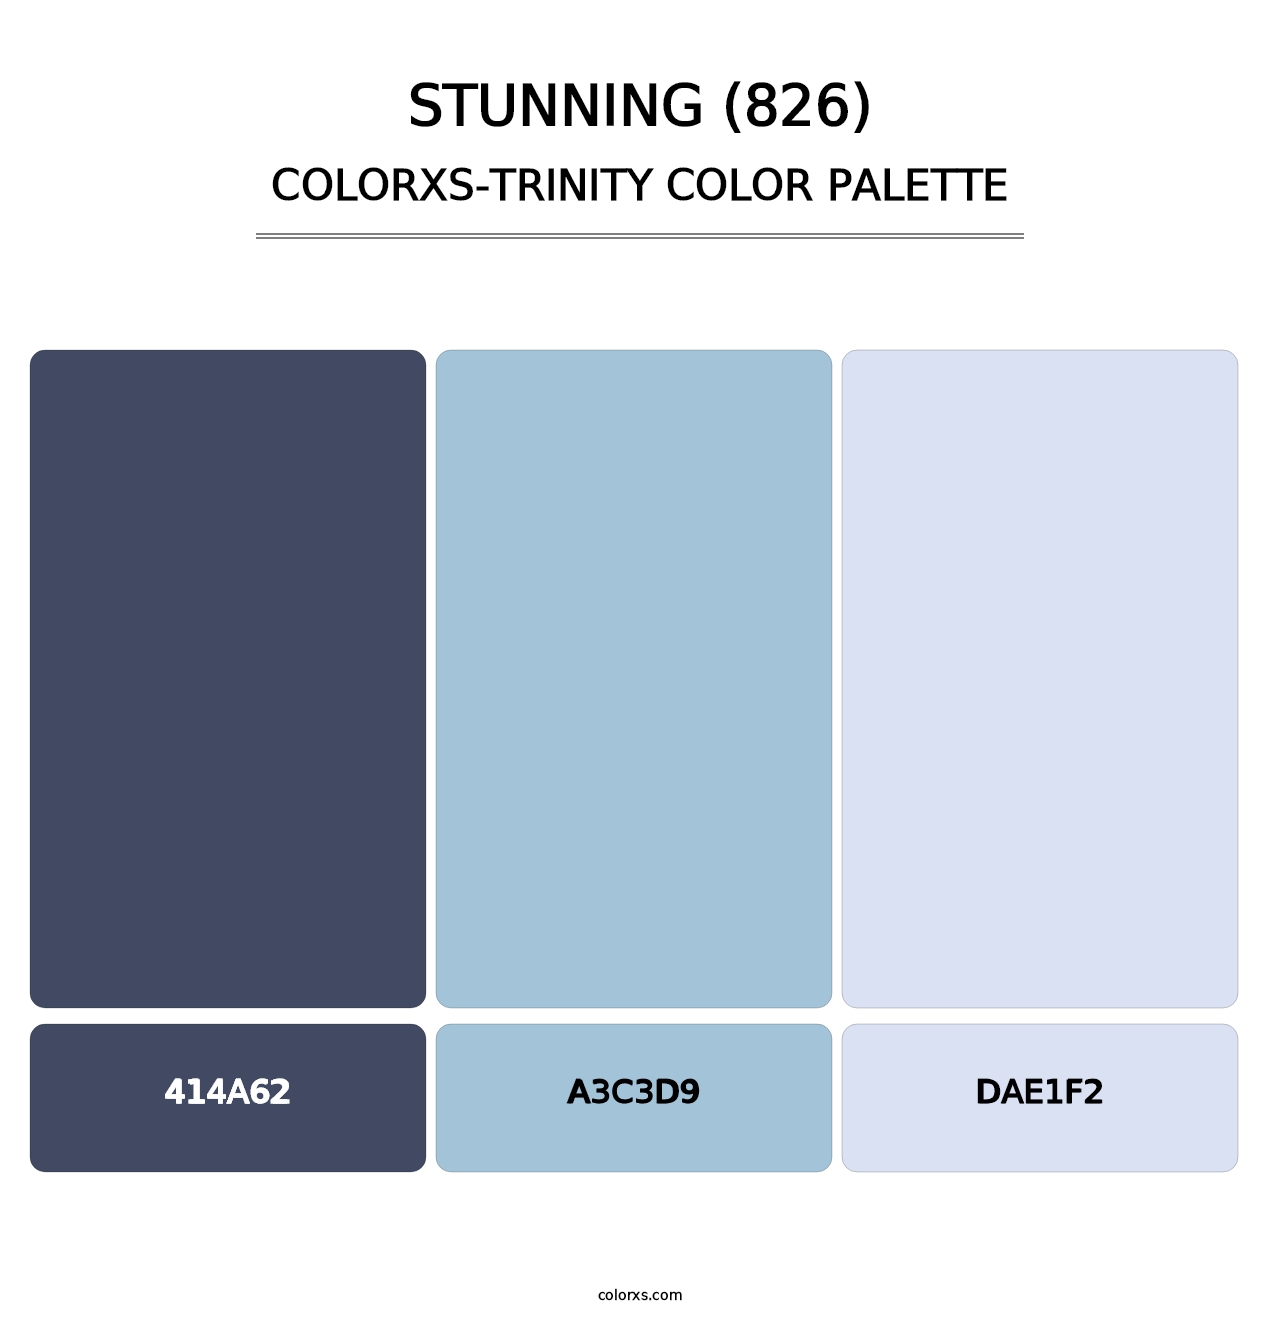 Stunning (826) - Colorxs Trinity Palette